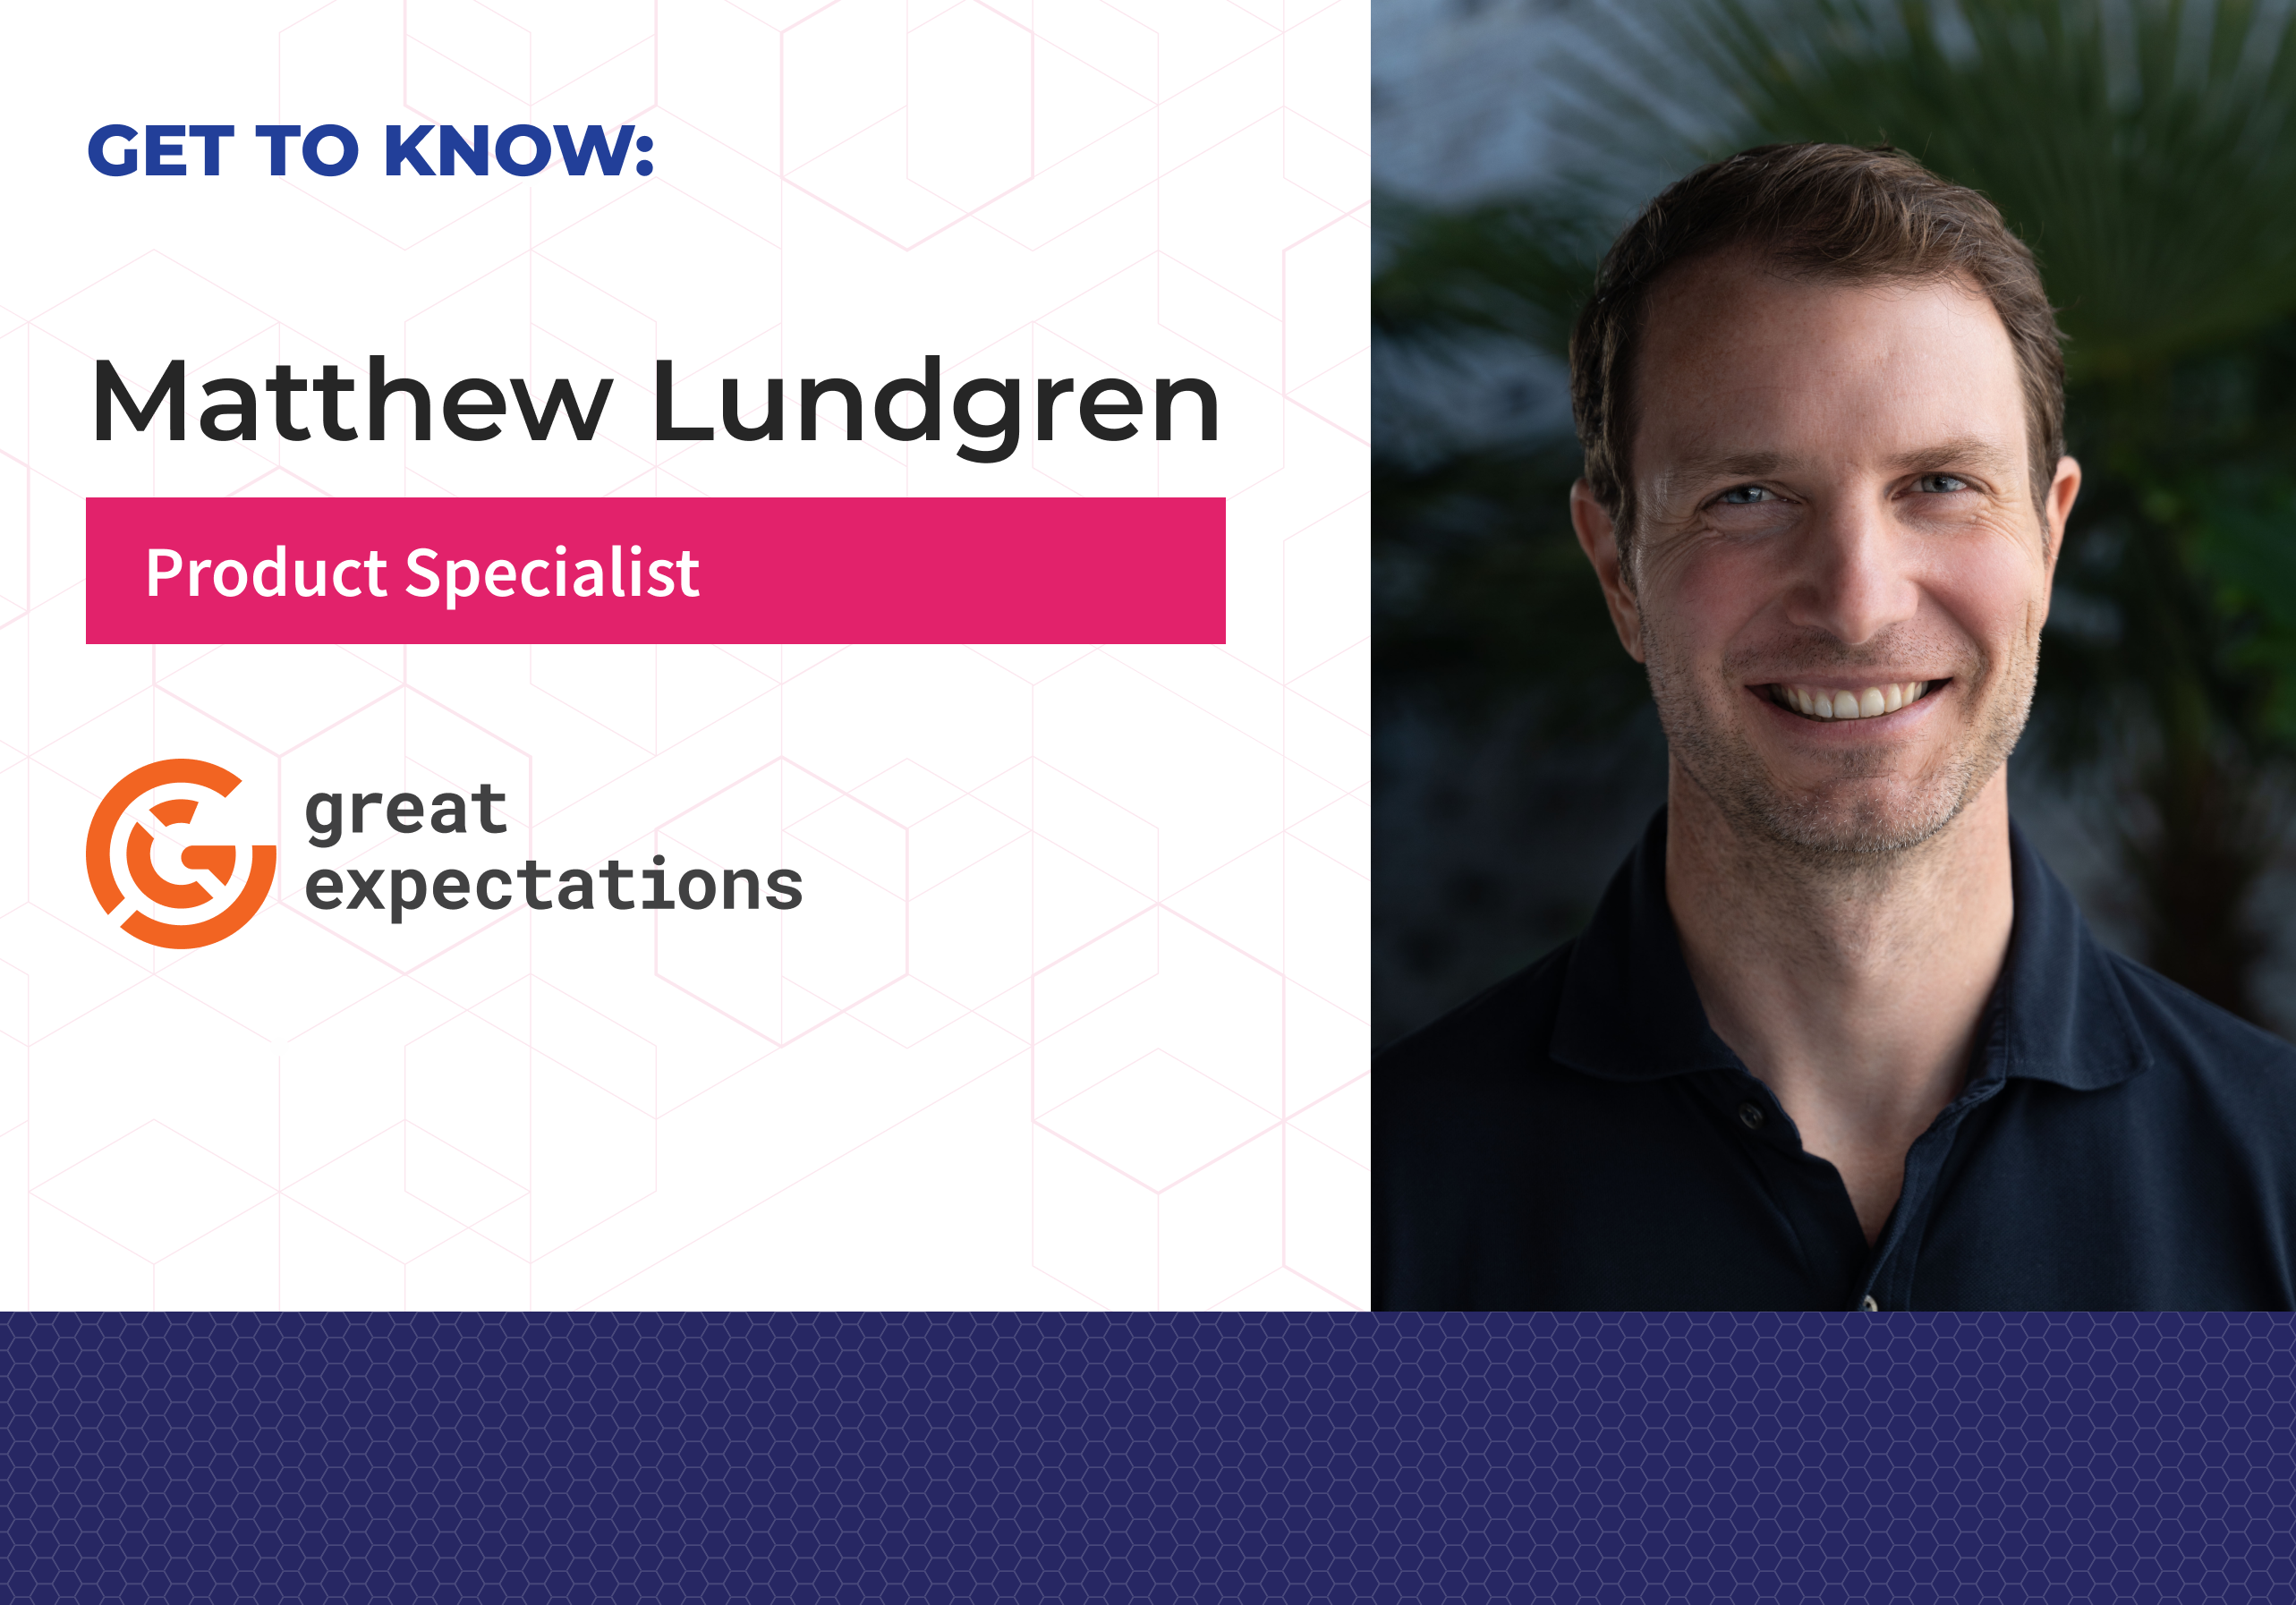 Get-to-know card with Matthew Lundgren's headshot, title, and the GX logo